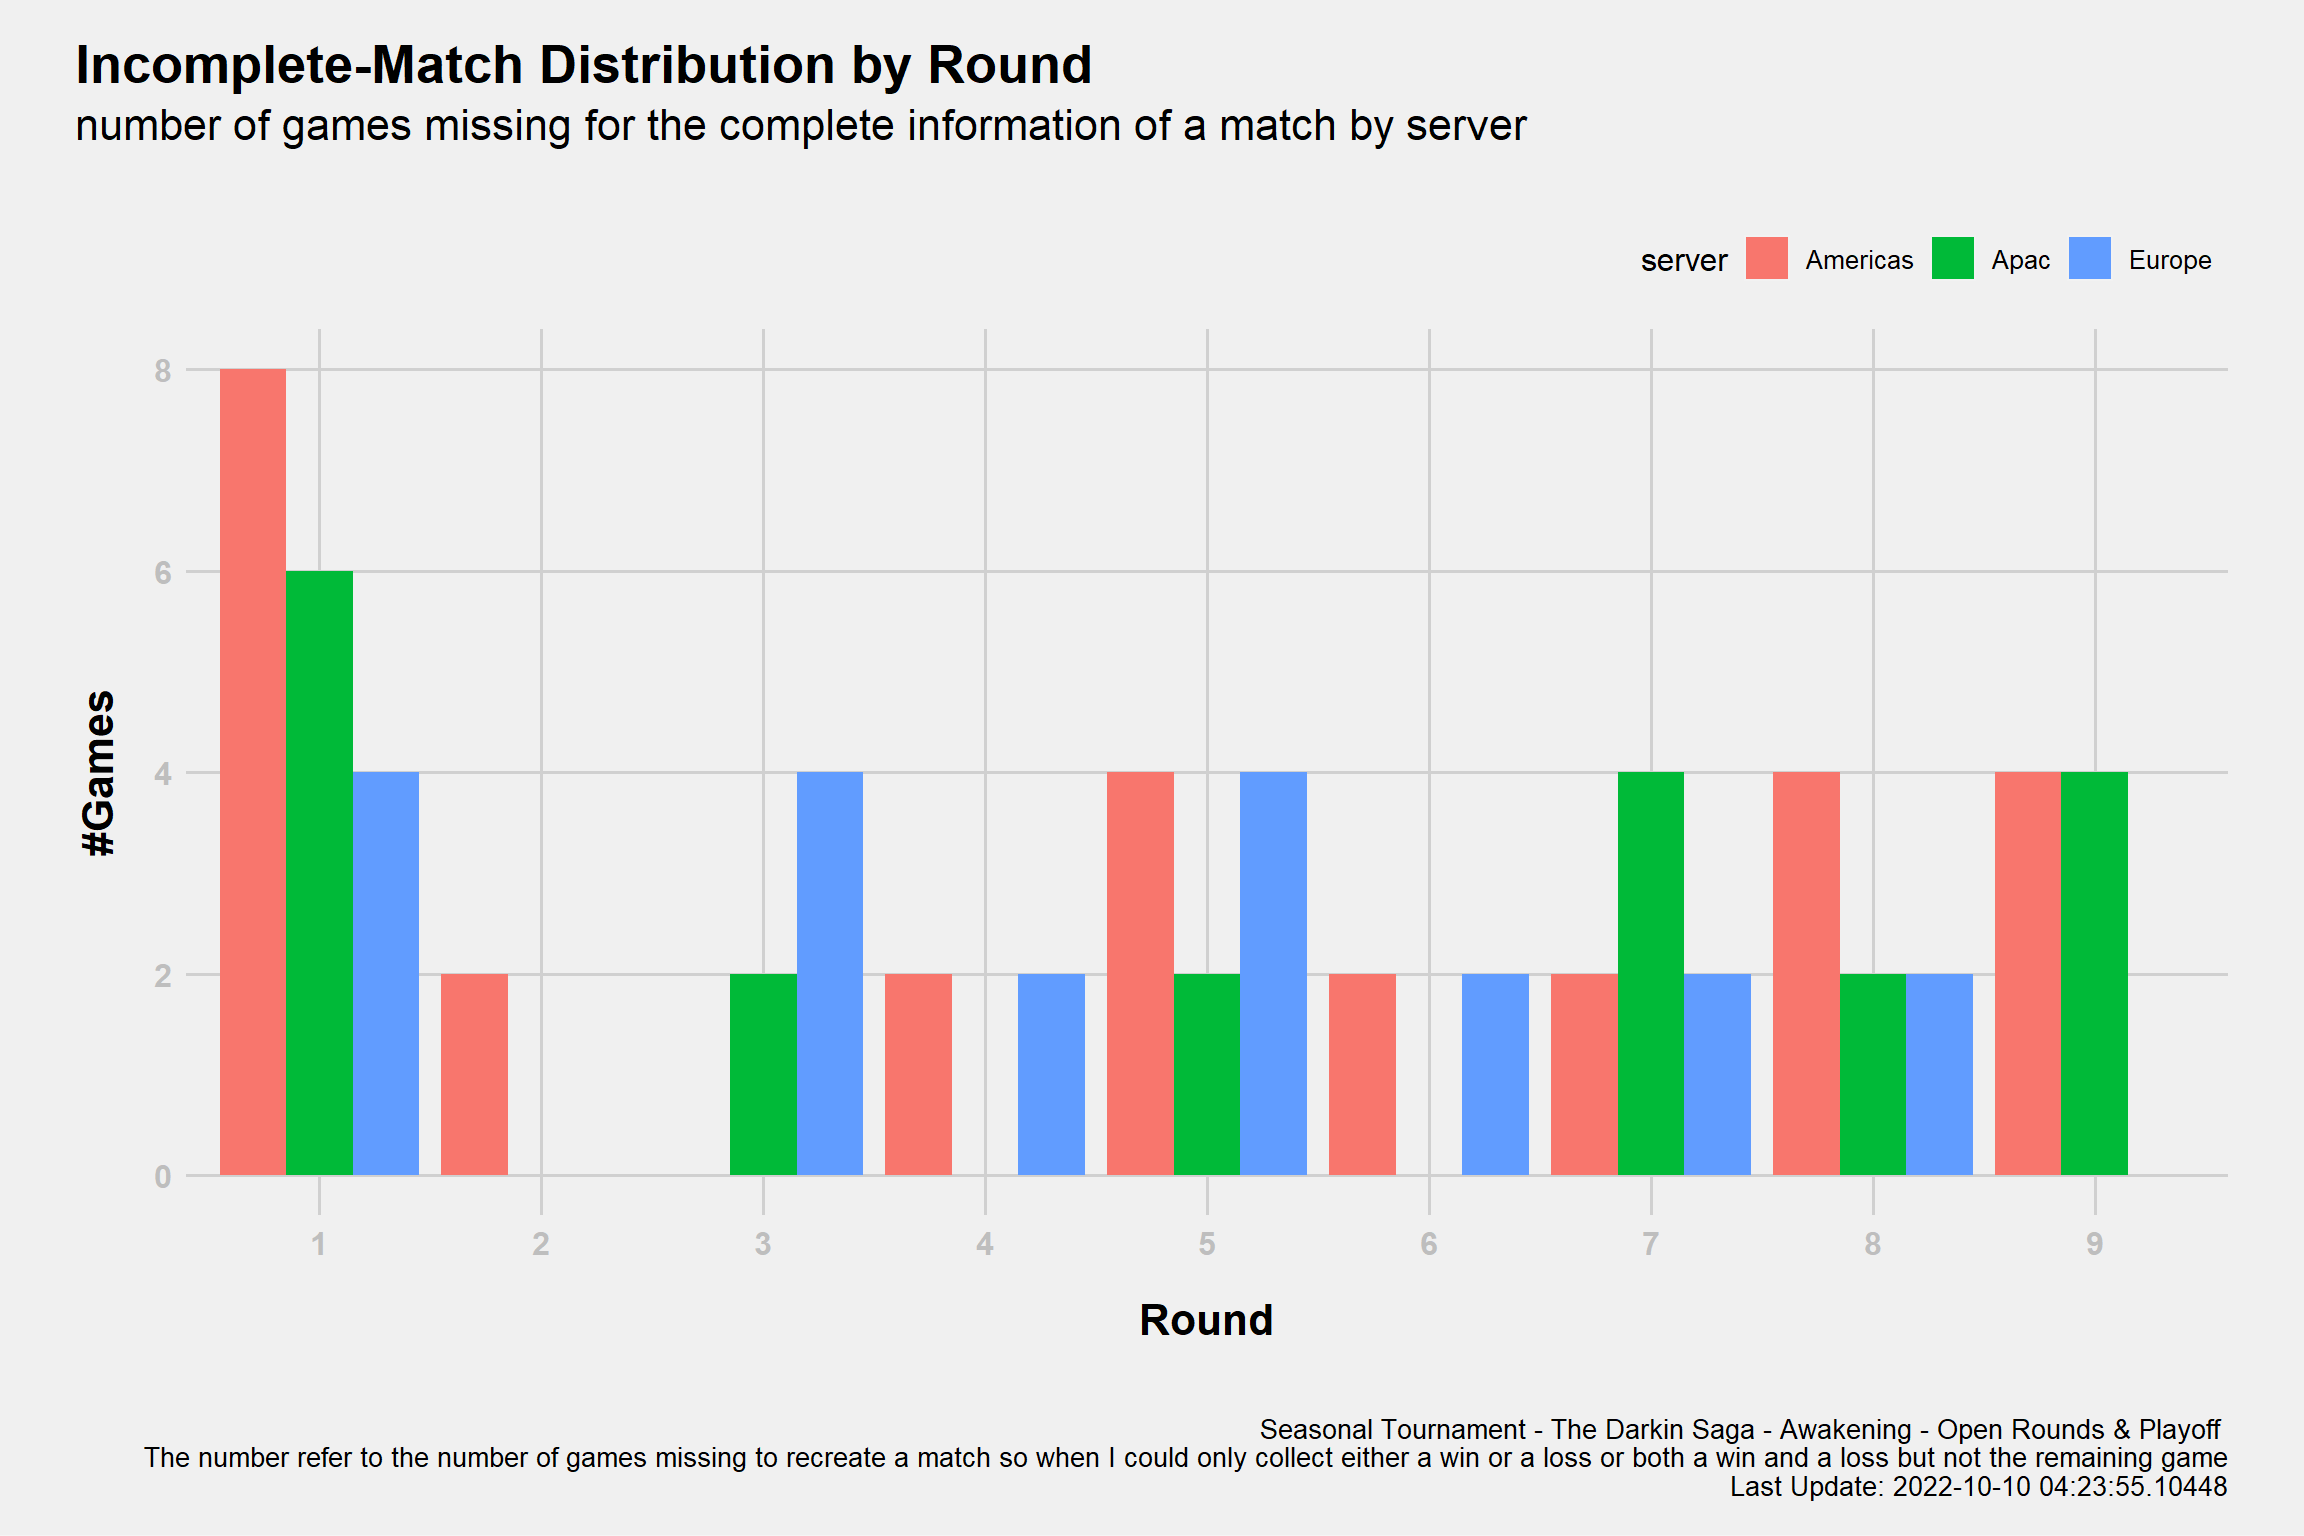 Uncomplete Matches Distribution